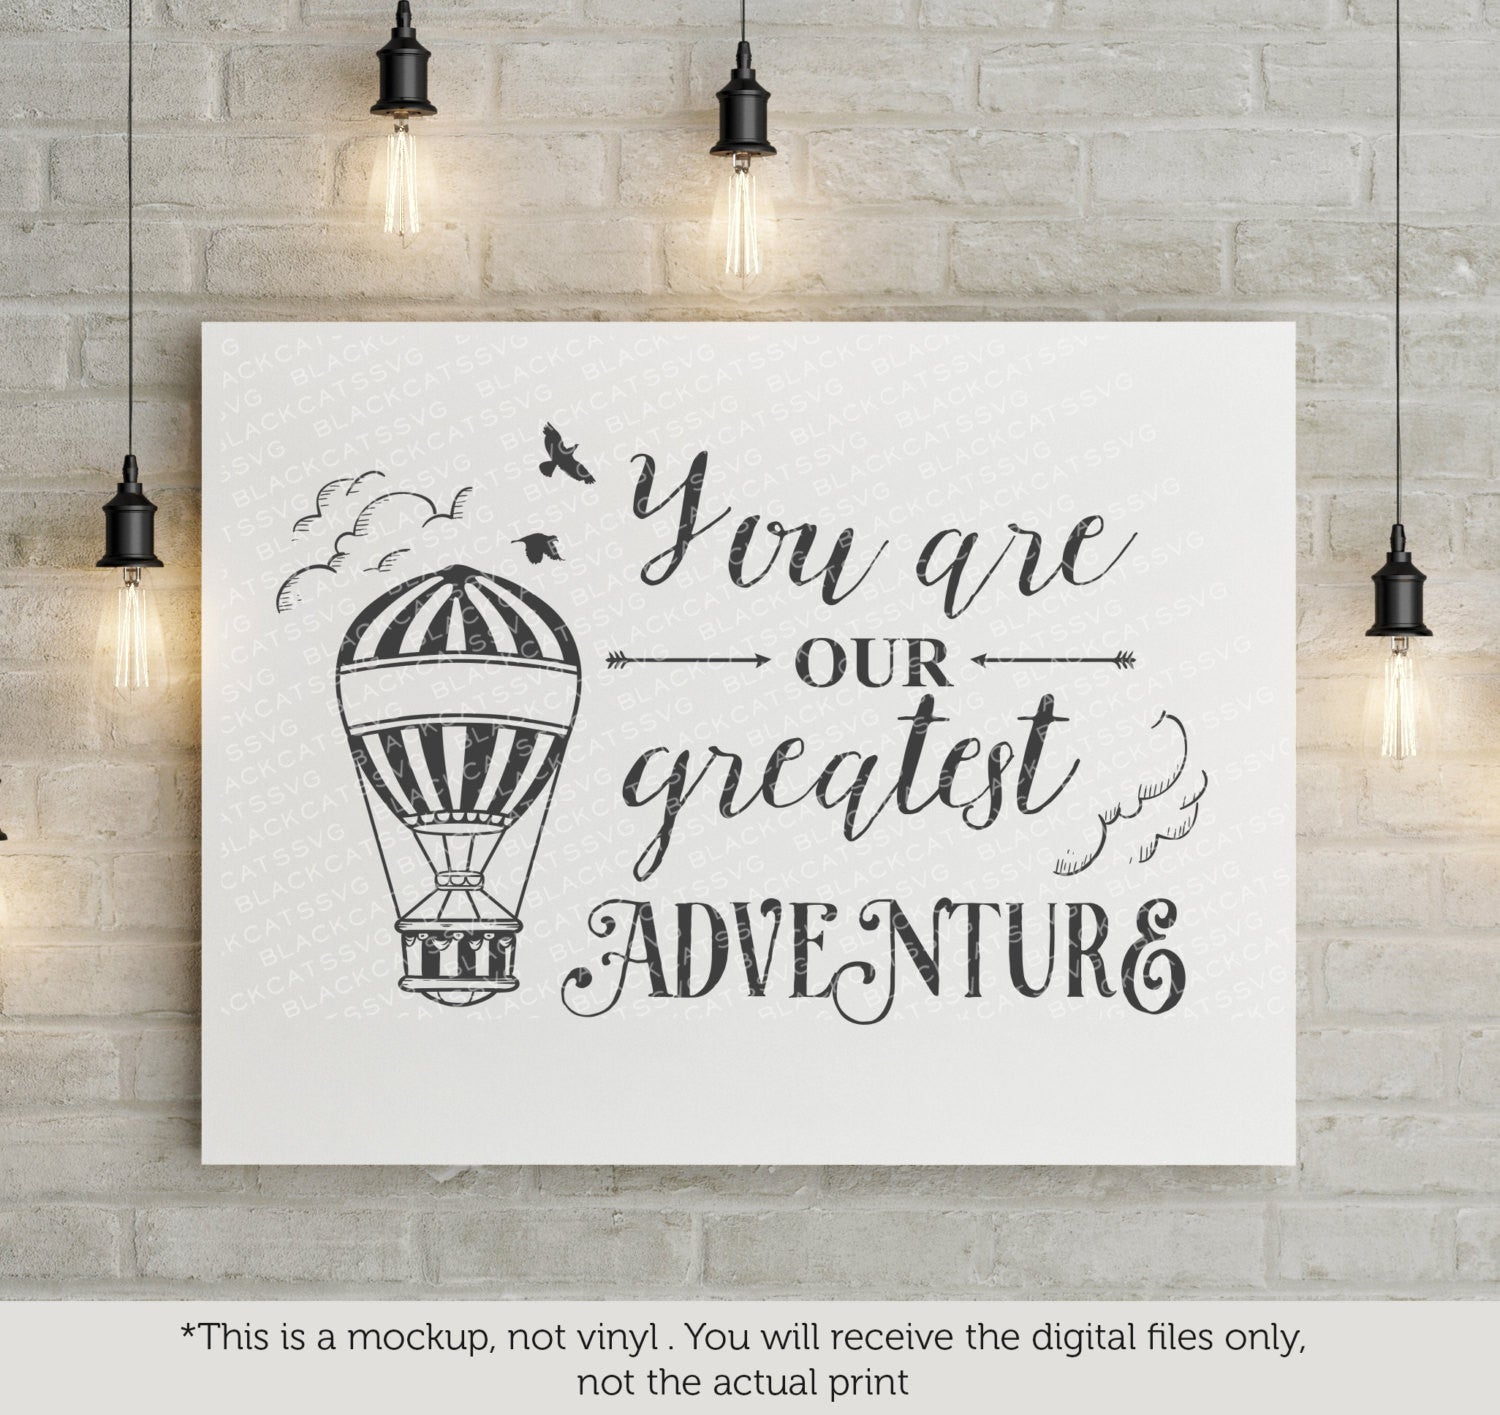 You are our greatest adventure -  SVG file Cutting File Clipart in Svg, Eps, Dxf, Png for Cricut & Silhouette -  svg - BlackCatsSVG